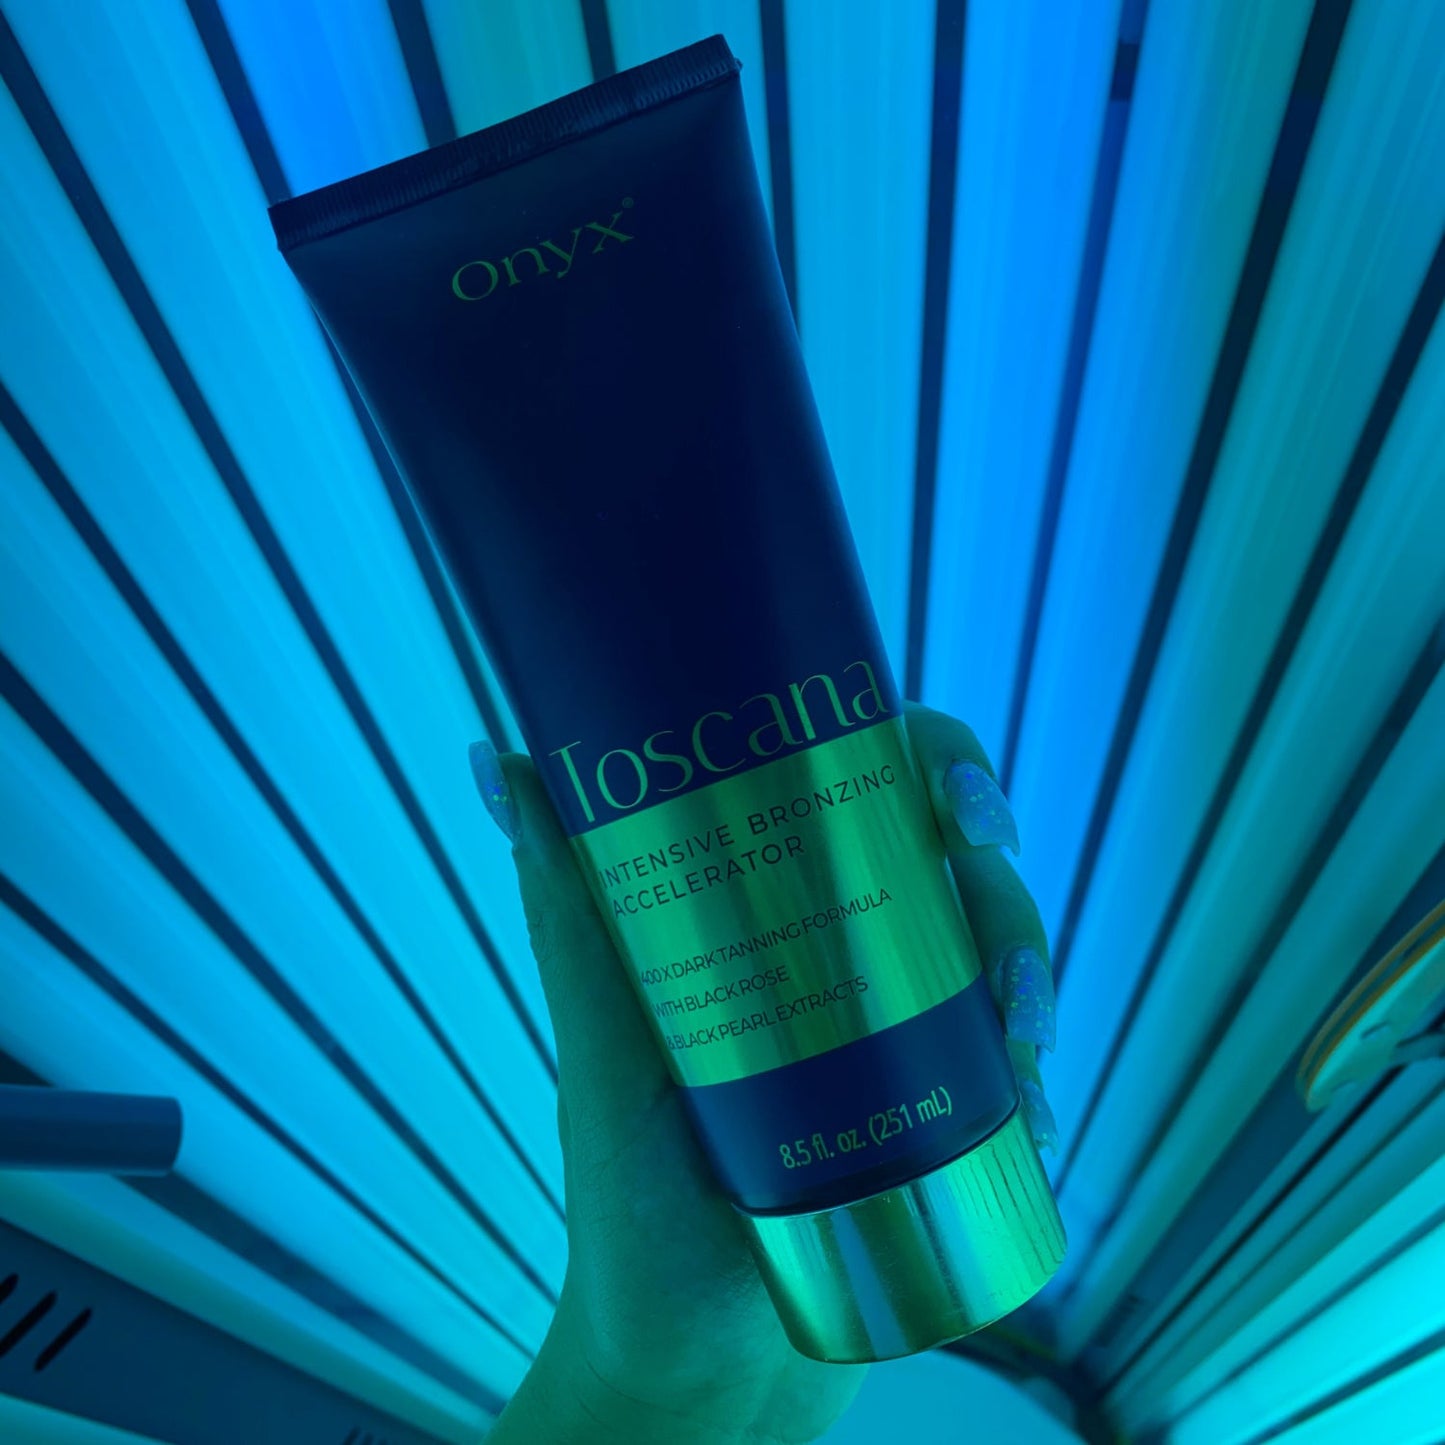 Toscana sunbed cream with bronzer and accelerator